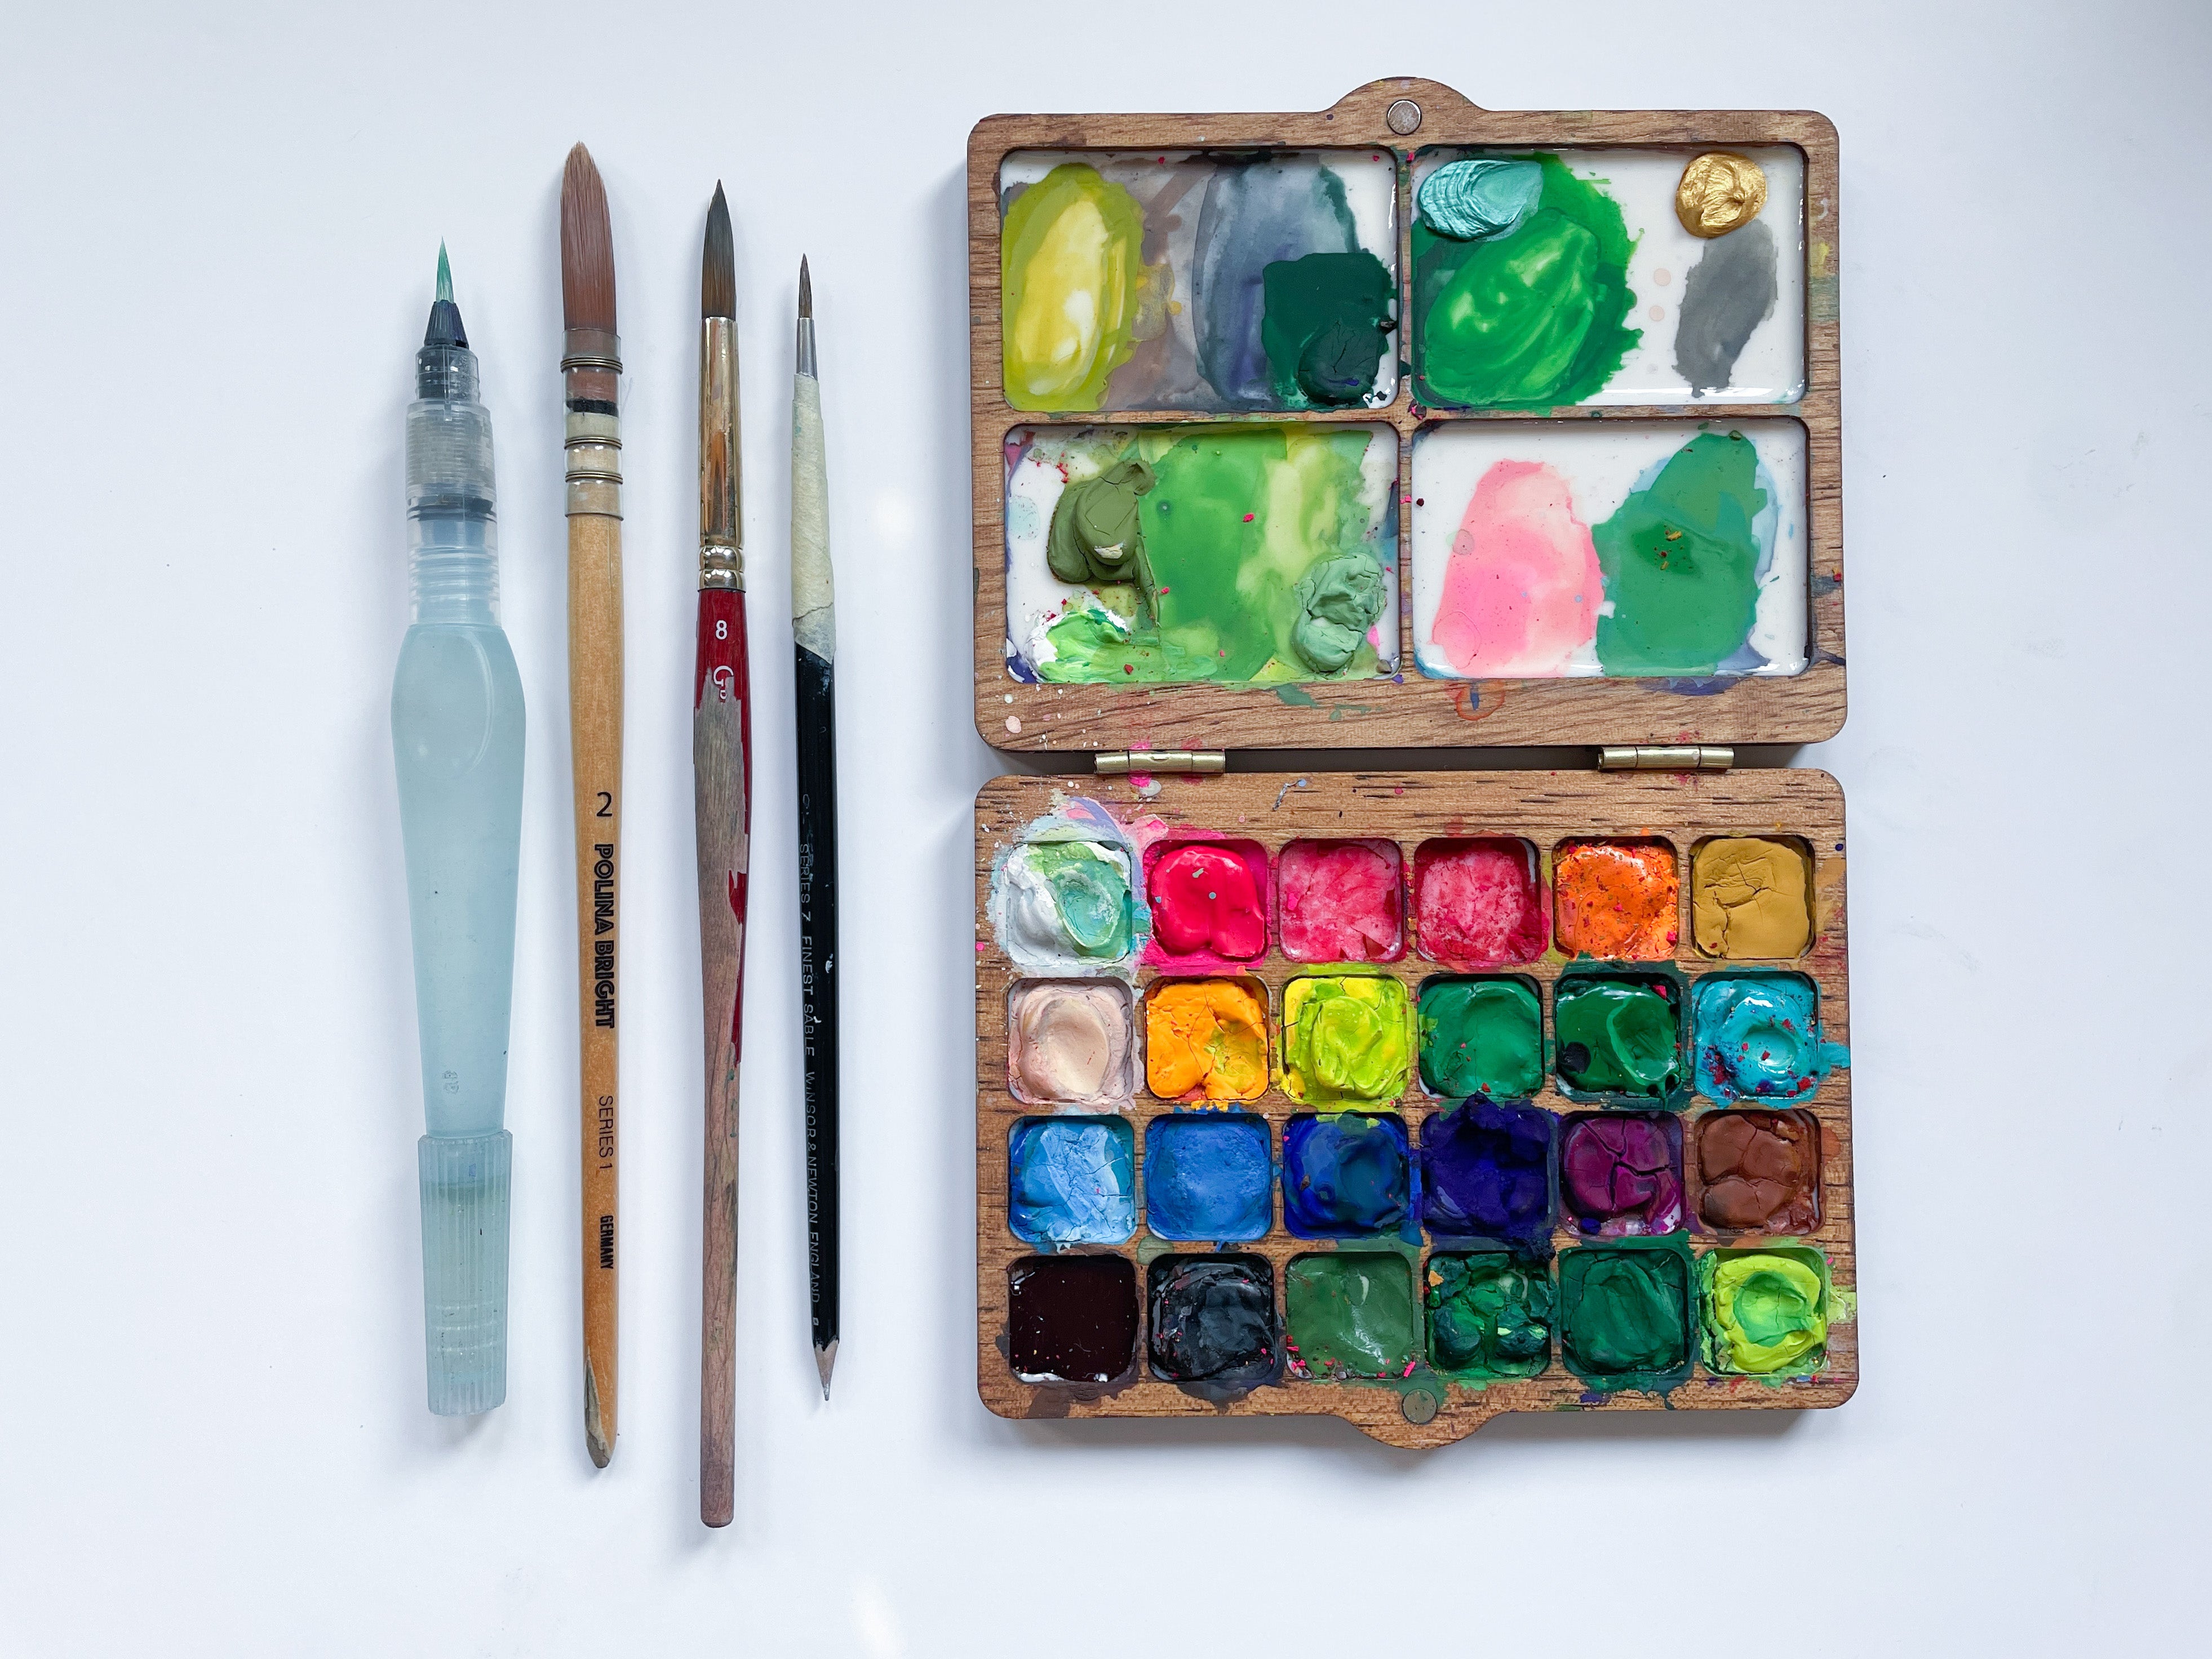 My favorite art supplies to create realistic drawings